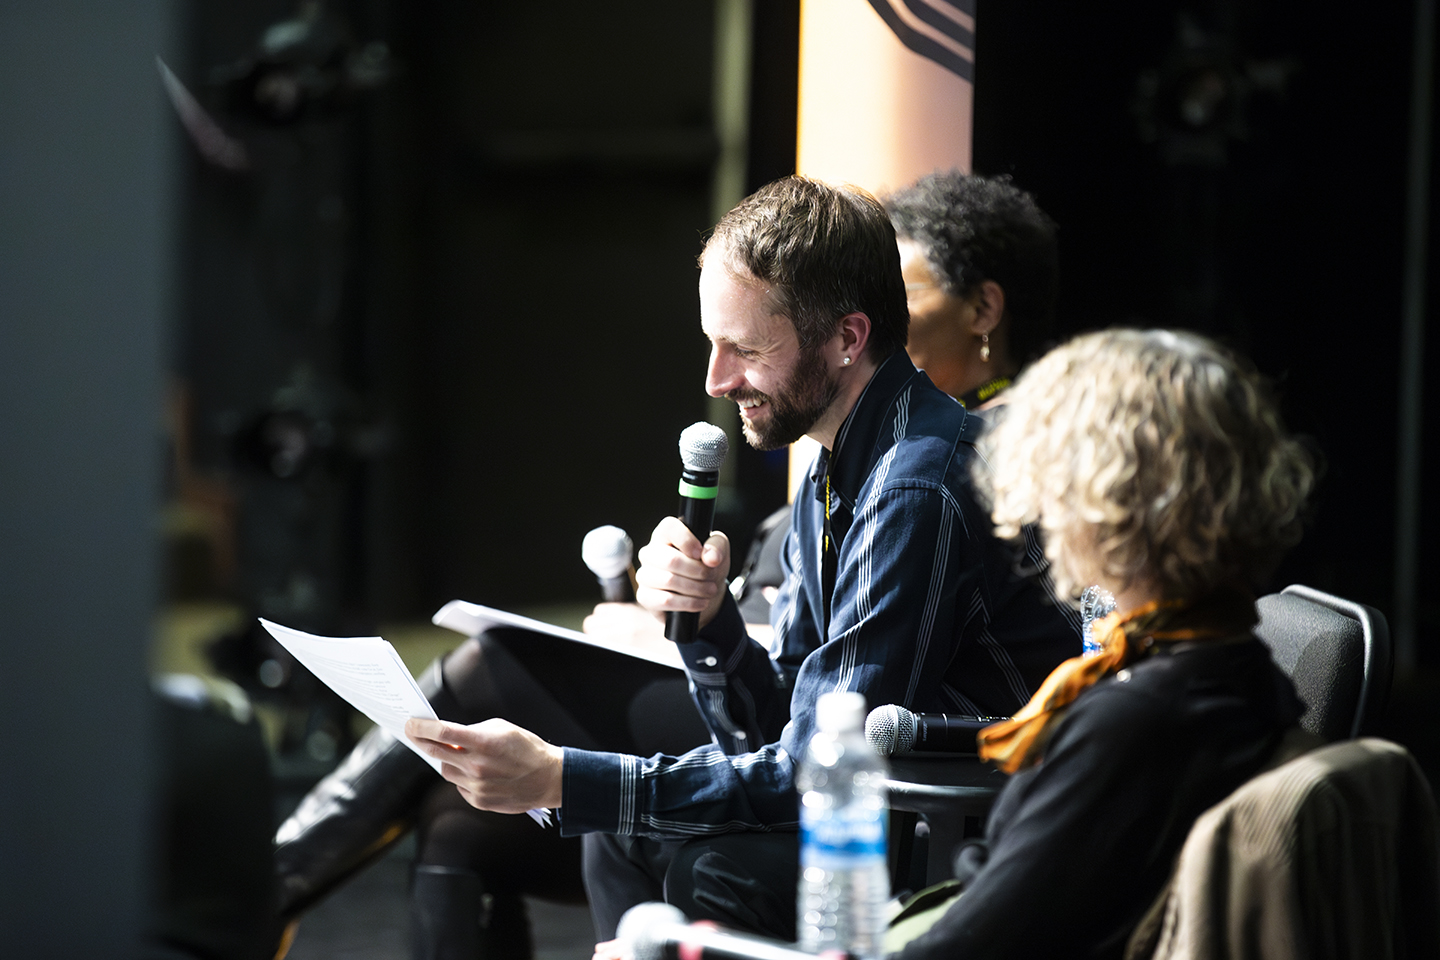 The poet on stage, seated and holding a microphone. He is flanked by two other panelists, who are out of focus.